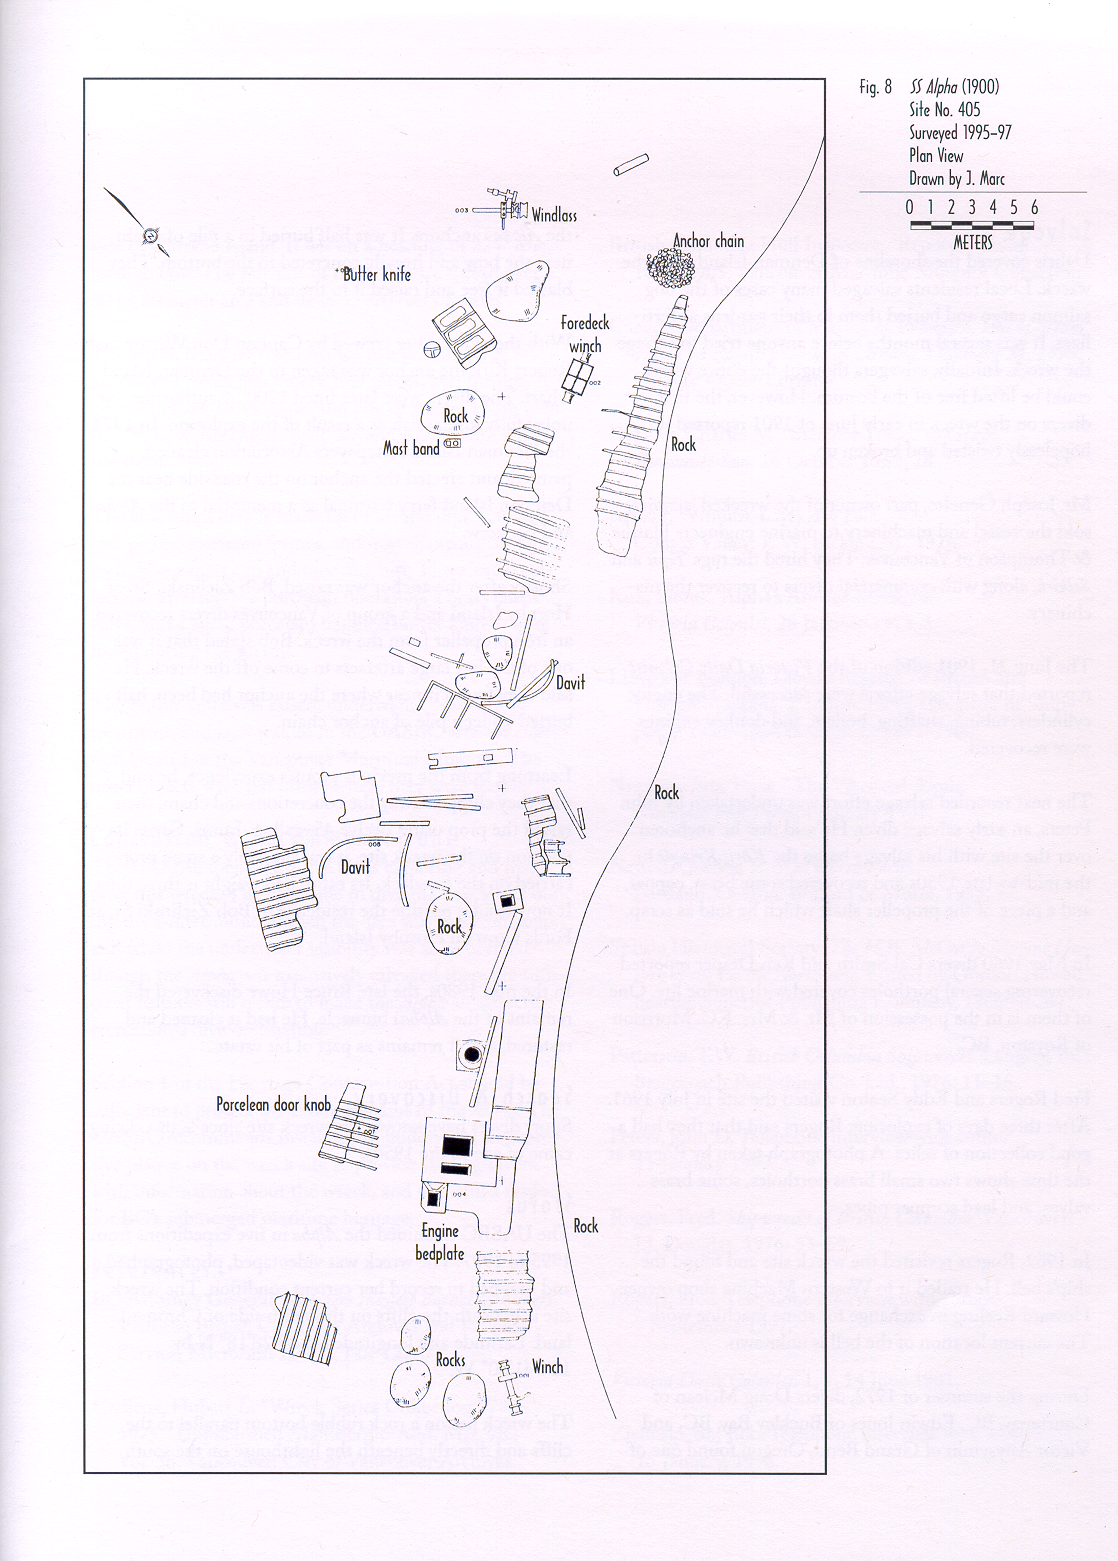 paper with site plan of the Alpha shipwreck